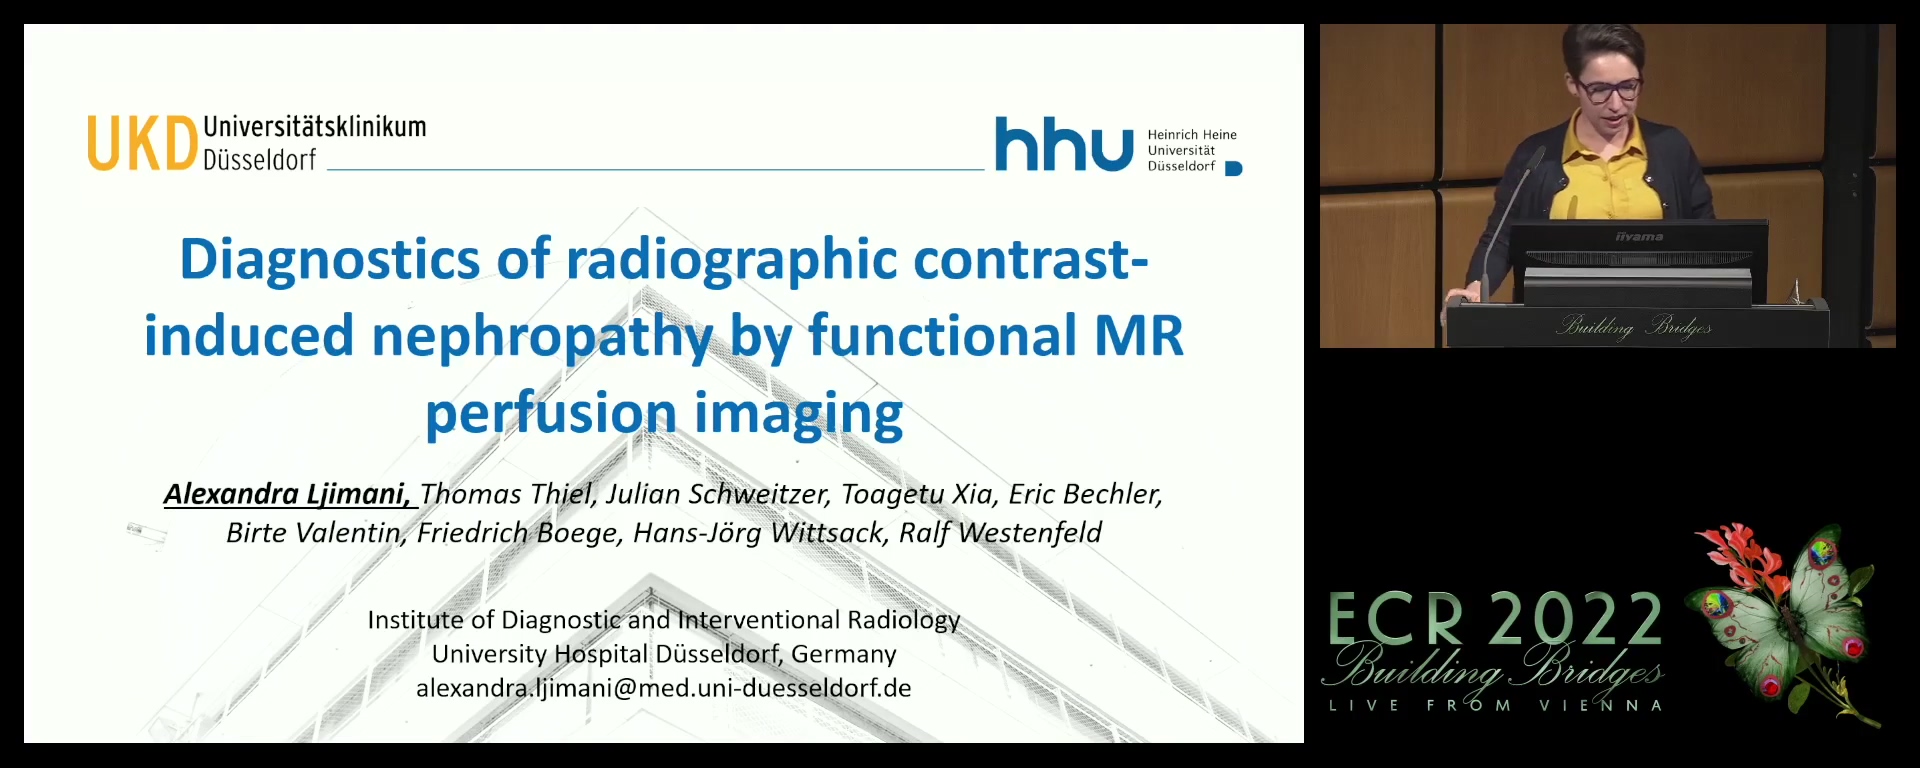 Diagnostics of radiographic contrast-induced nephropathy by functional renal MR perfusion imaging